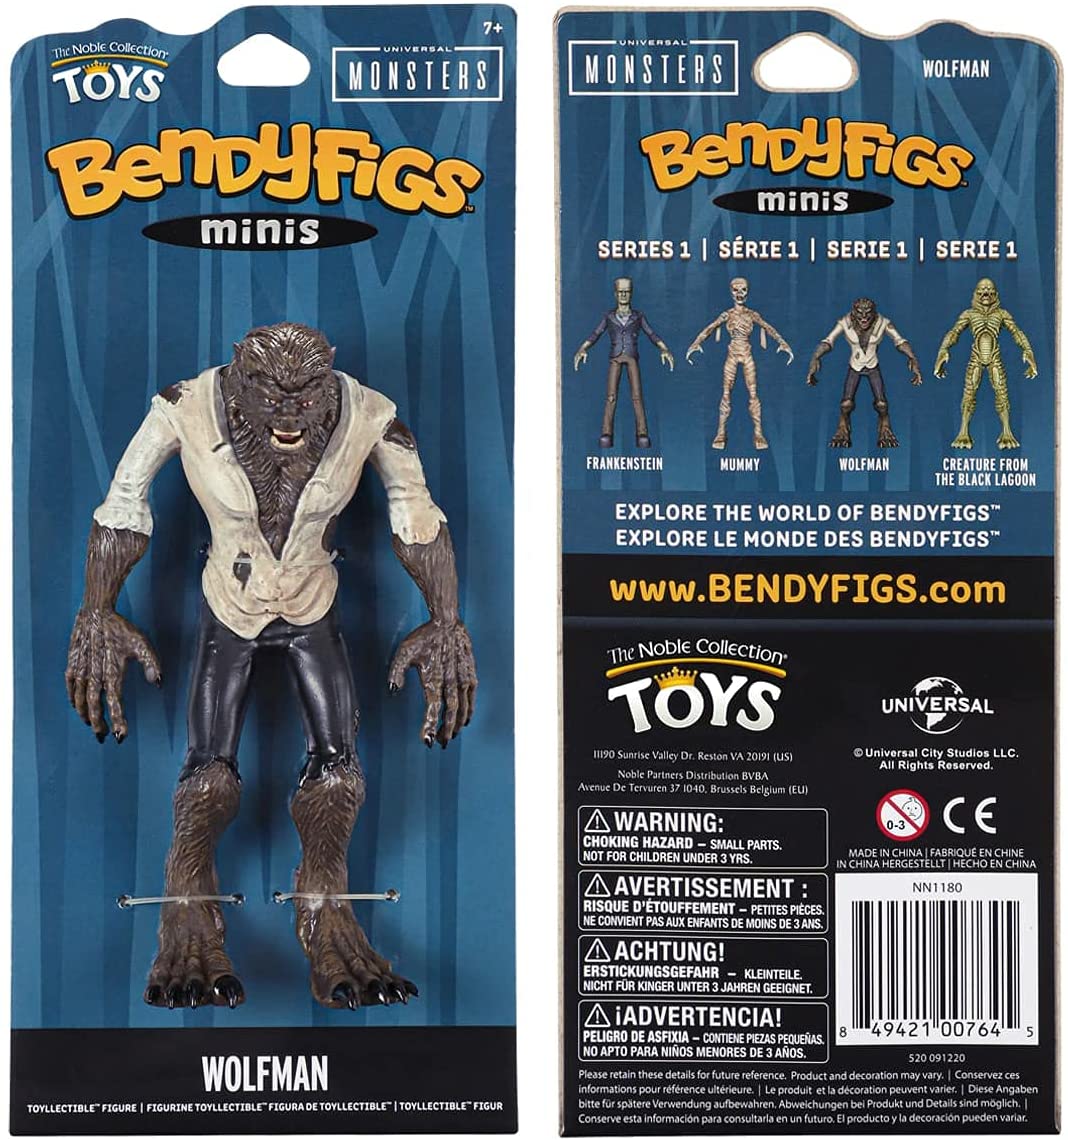 The Noble Collection Universal-Wolfman Mini Bendyfig